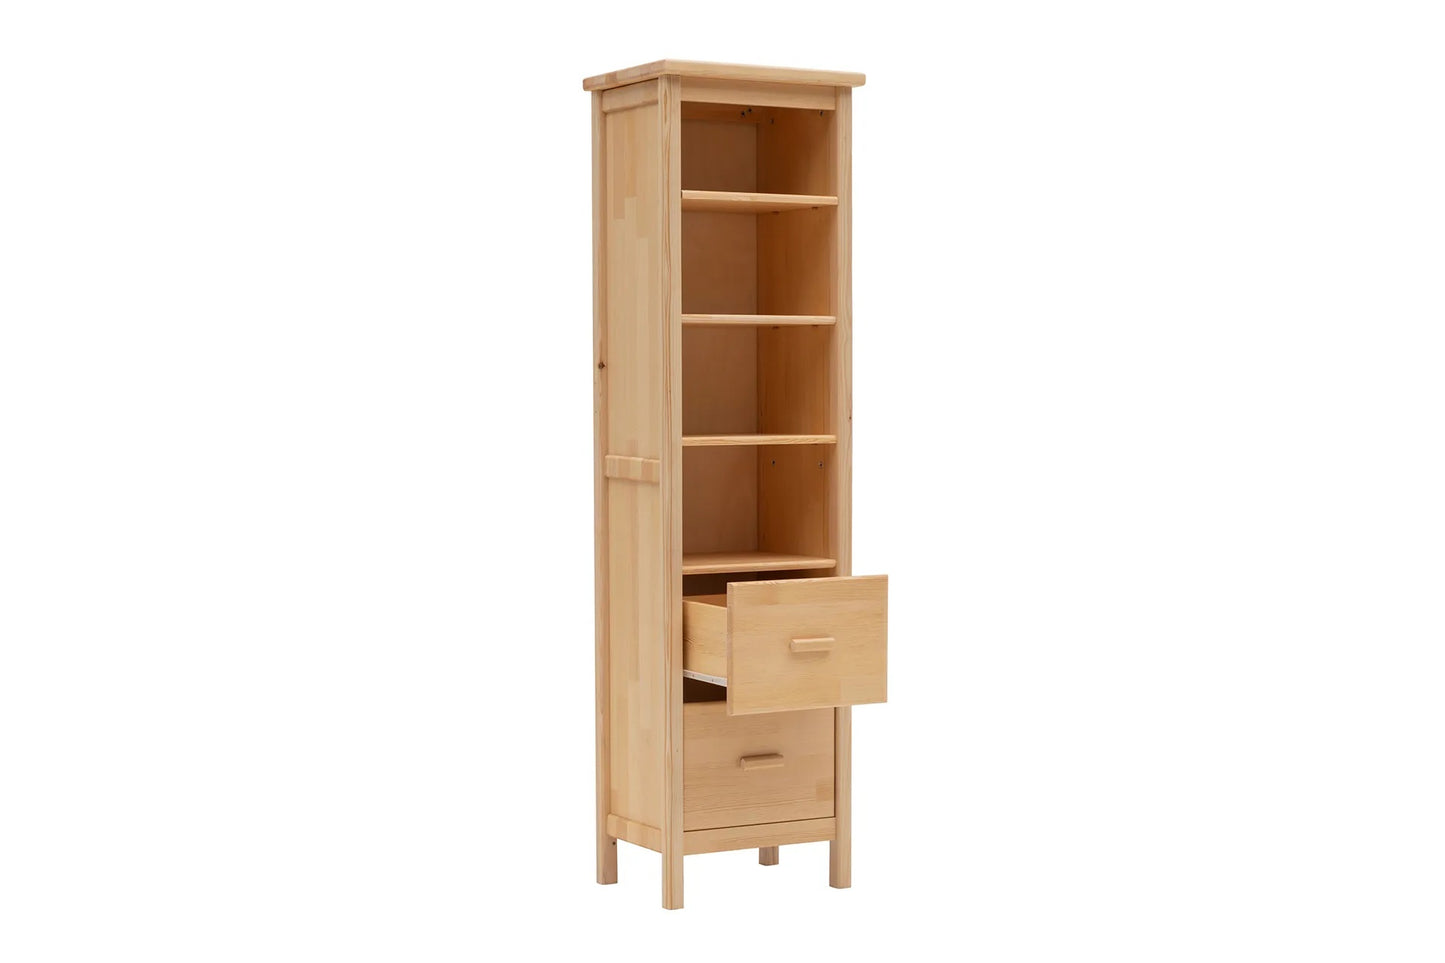 Dawn Solid Pine Wood Handmade Bookcase Bookshelf Shelving Unit with Drawers an Open Storage Shelves